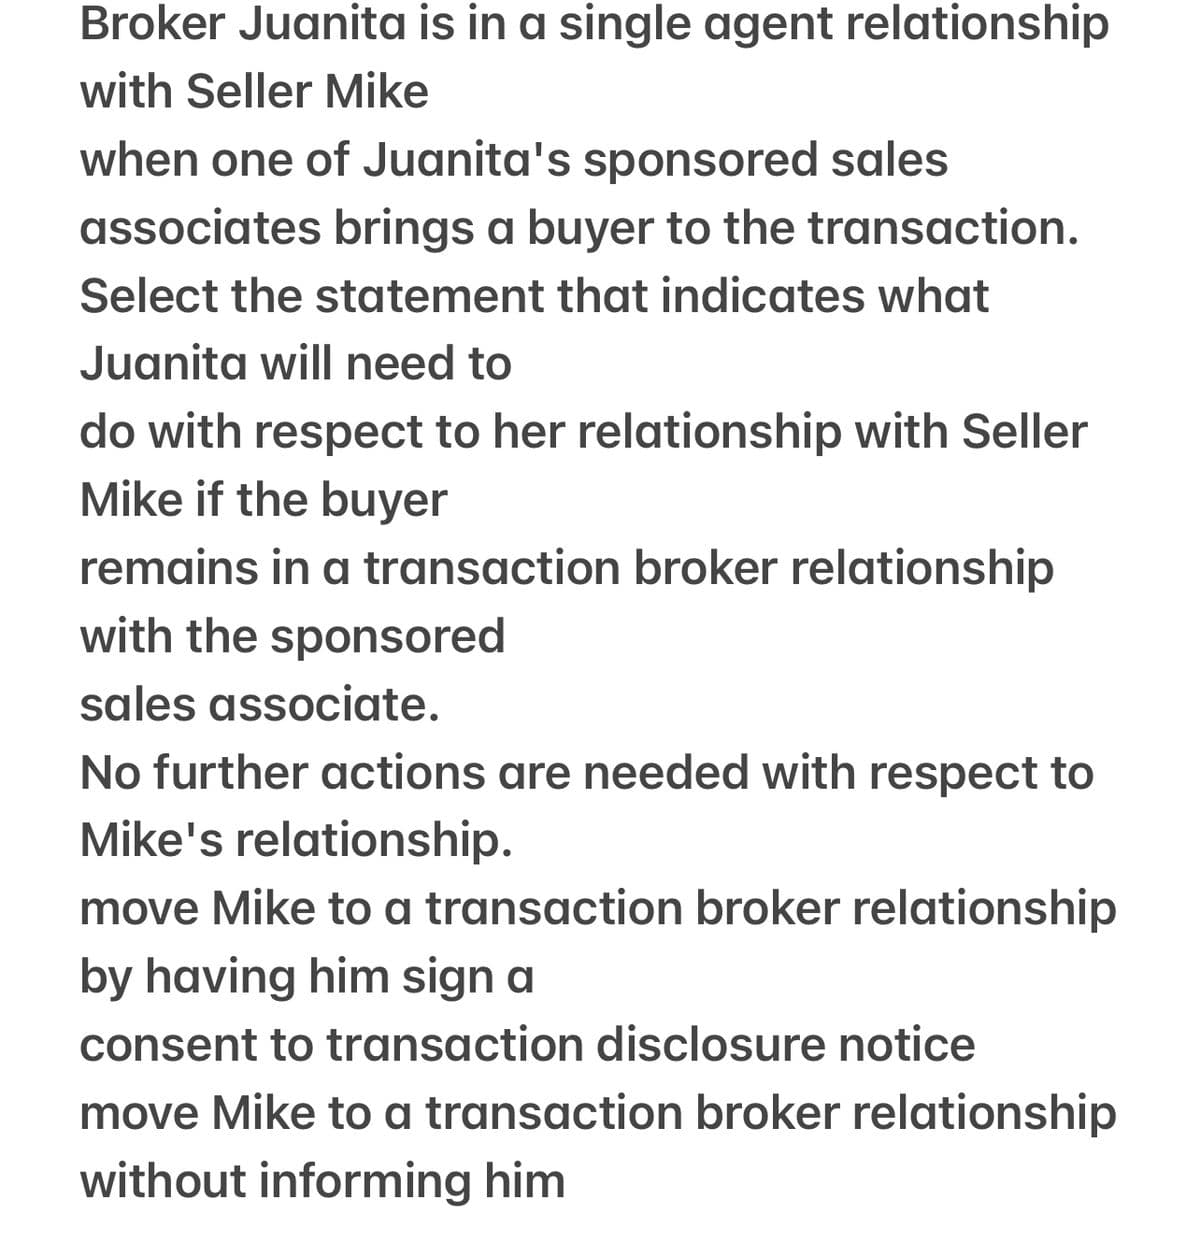 Broker Juanita is in a single agent relationship
with Seller Mike
when one of Juanita's sponsored sales
associates brings a buyer to the transaction.
Select the statement that indicates what
Juanita will need to
do with respect to her relationship with Seller
Mike if the buyer
remains in a transaction broker relationship
with the sponsored
sales associate.
No further actions are needed with respect to
Mike's relationship.
move Mike to a transaction broker relationship
by having him sign a
consent to transaction disclosure notice
move Mike to a transaction broker relationship
without informing him